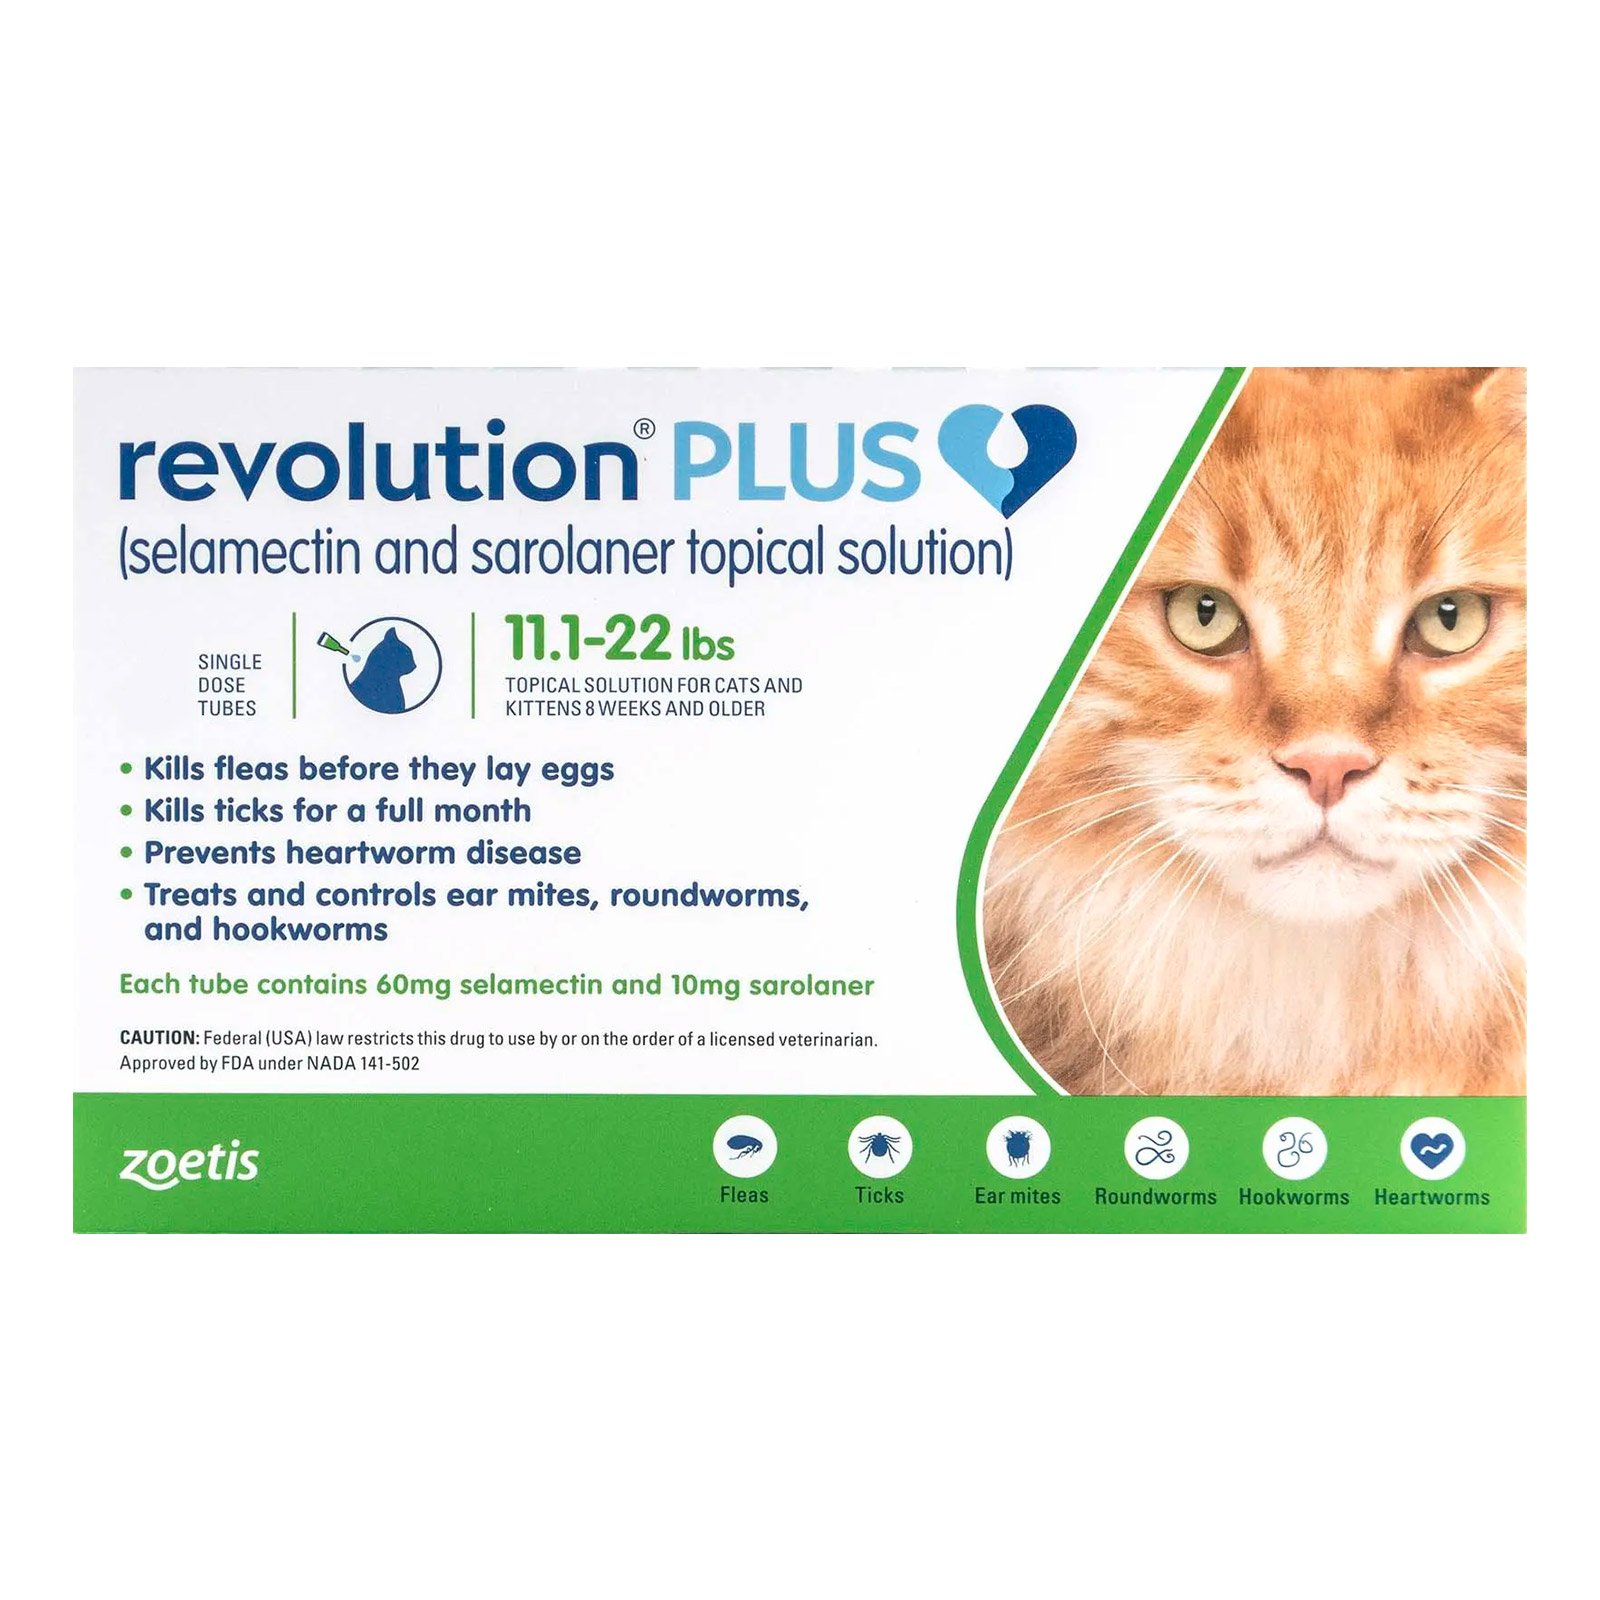 revolution-plus-for-Large-Cats-11-24lbs-5-10Kg-Green.jpg